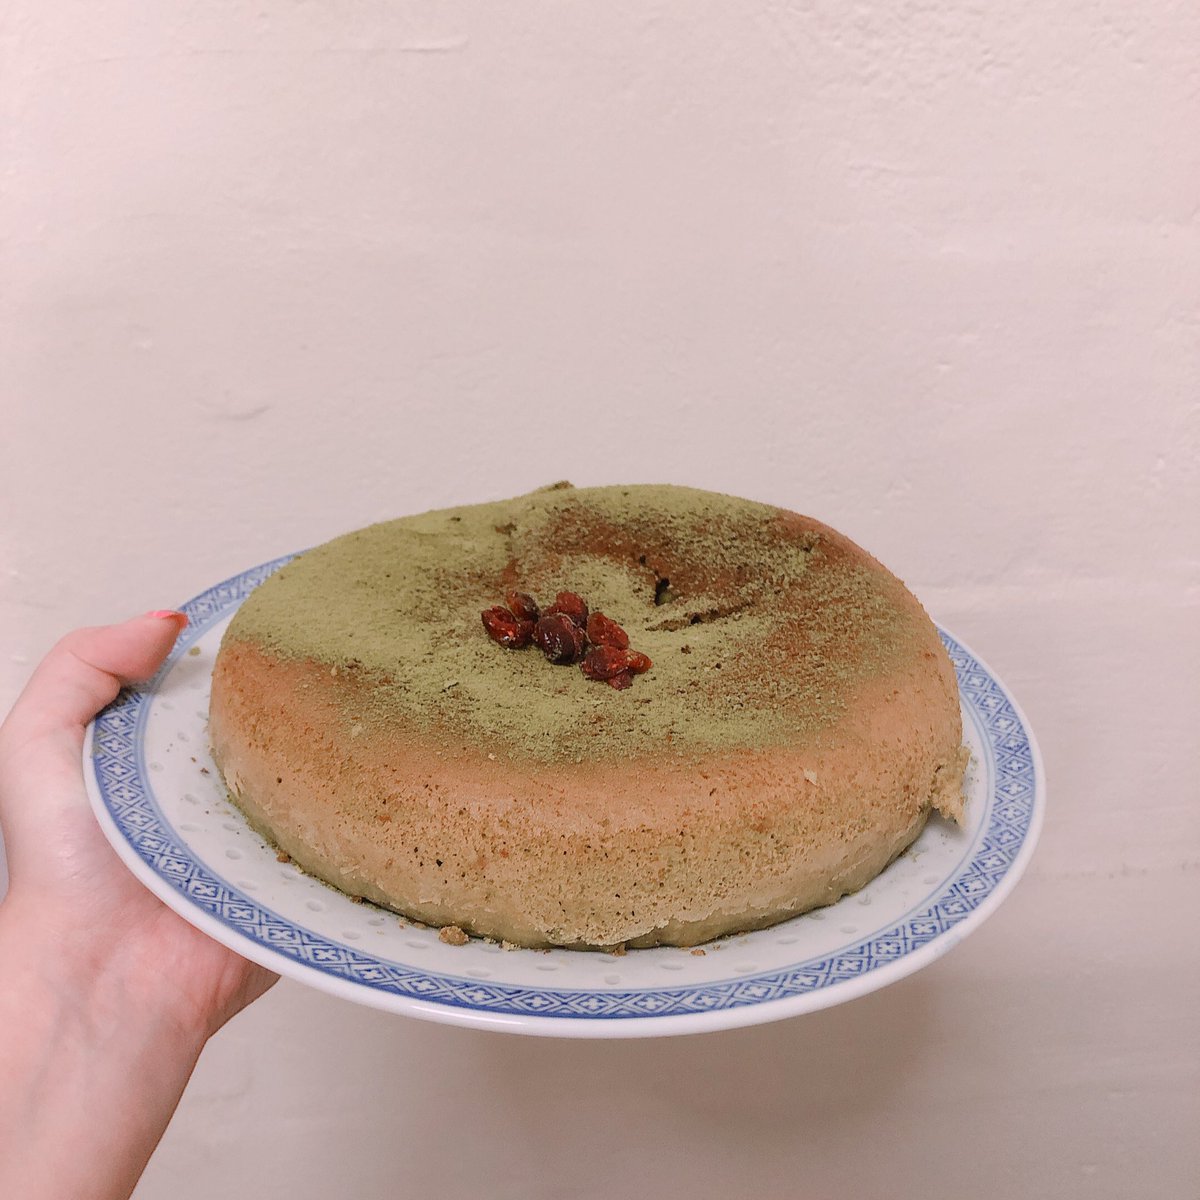 Dessert is matcha cake Hahahaha Tried the rice cooker matcha cake and it tasted not too bad, just that the top part was kinda dry